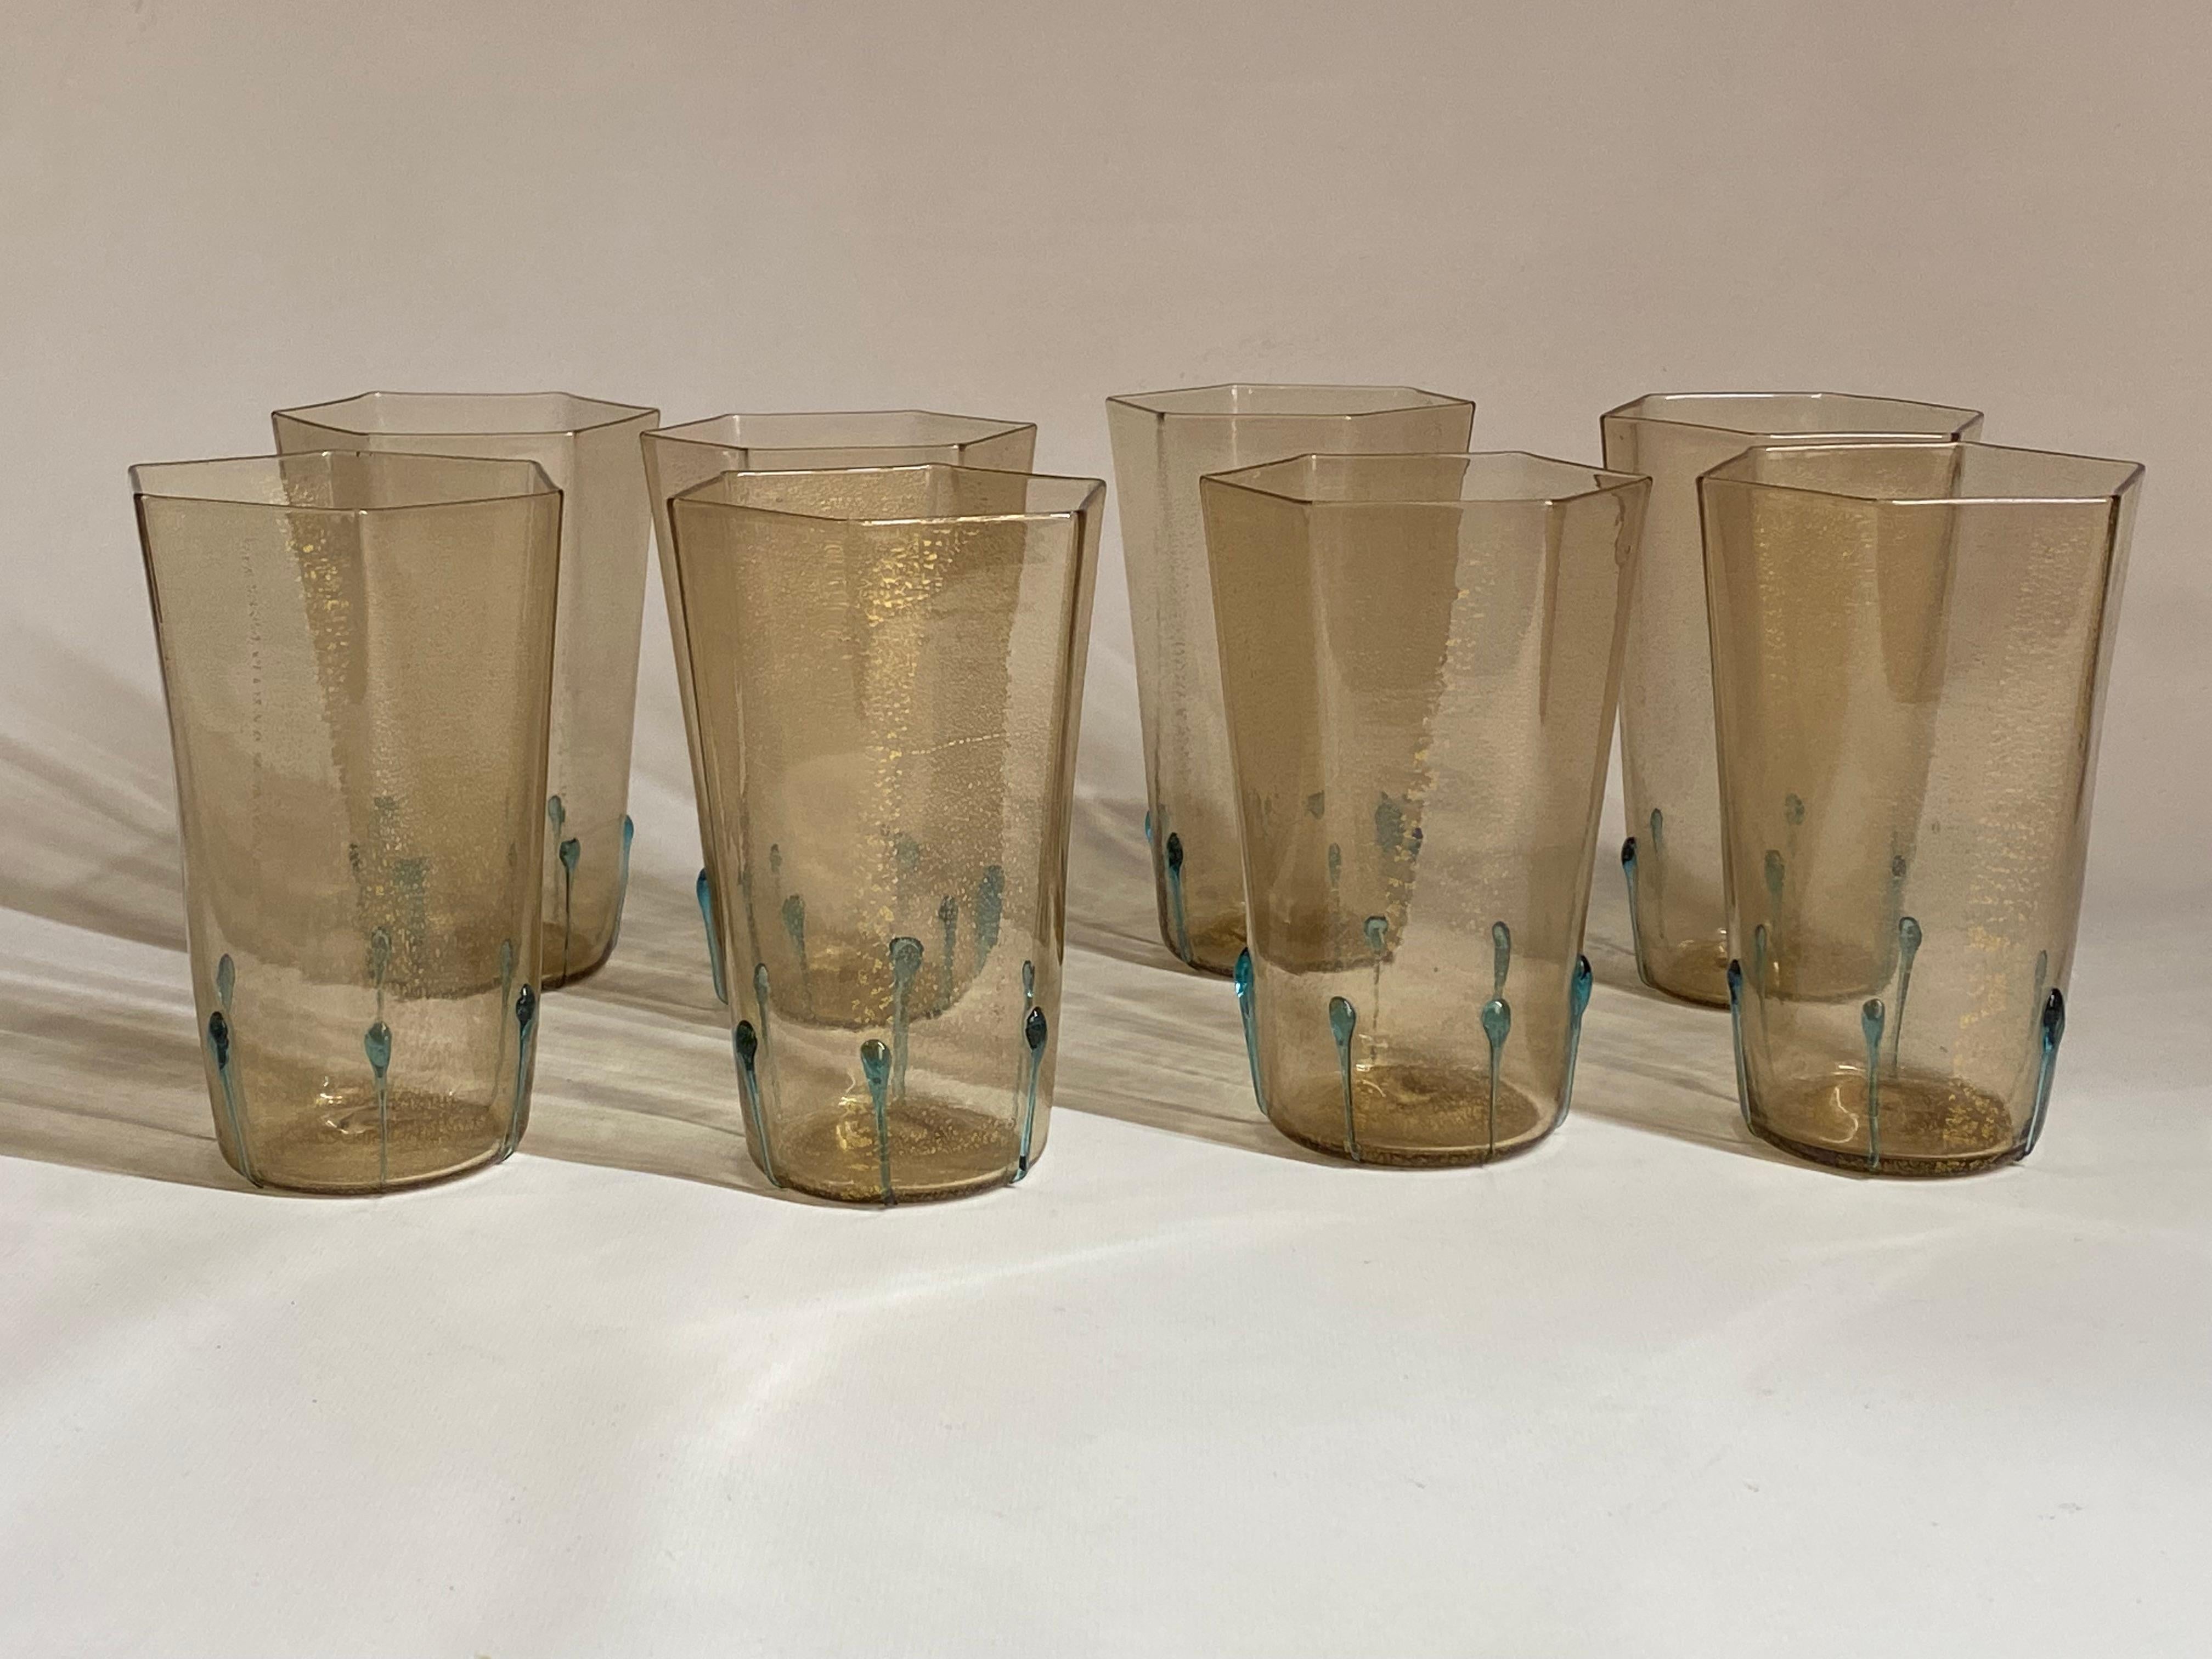 A fine set of eight hand blown hexagonal Murano drinking glasses with Aventurine inclusions. Lightweight, delicate and distinctly Italian. Hexagonal tops that taper off to a rounded base. Each glass is unique due to its technique in manufacturing.